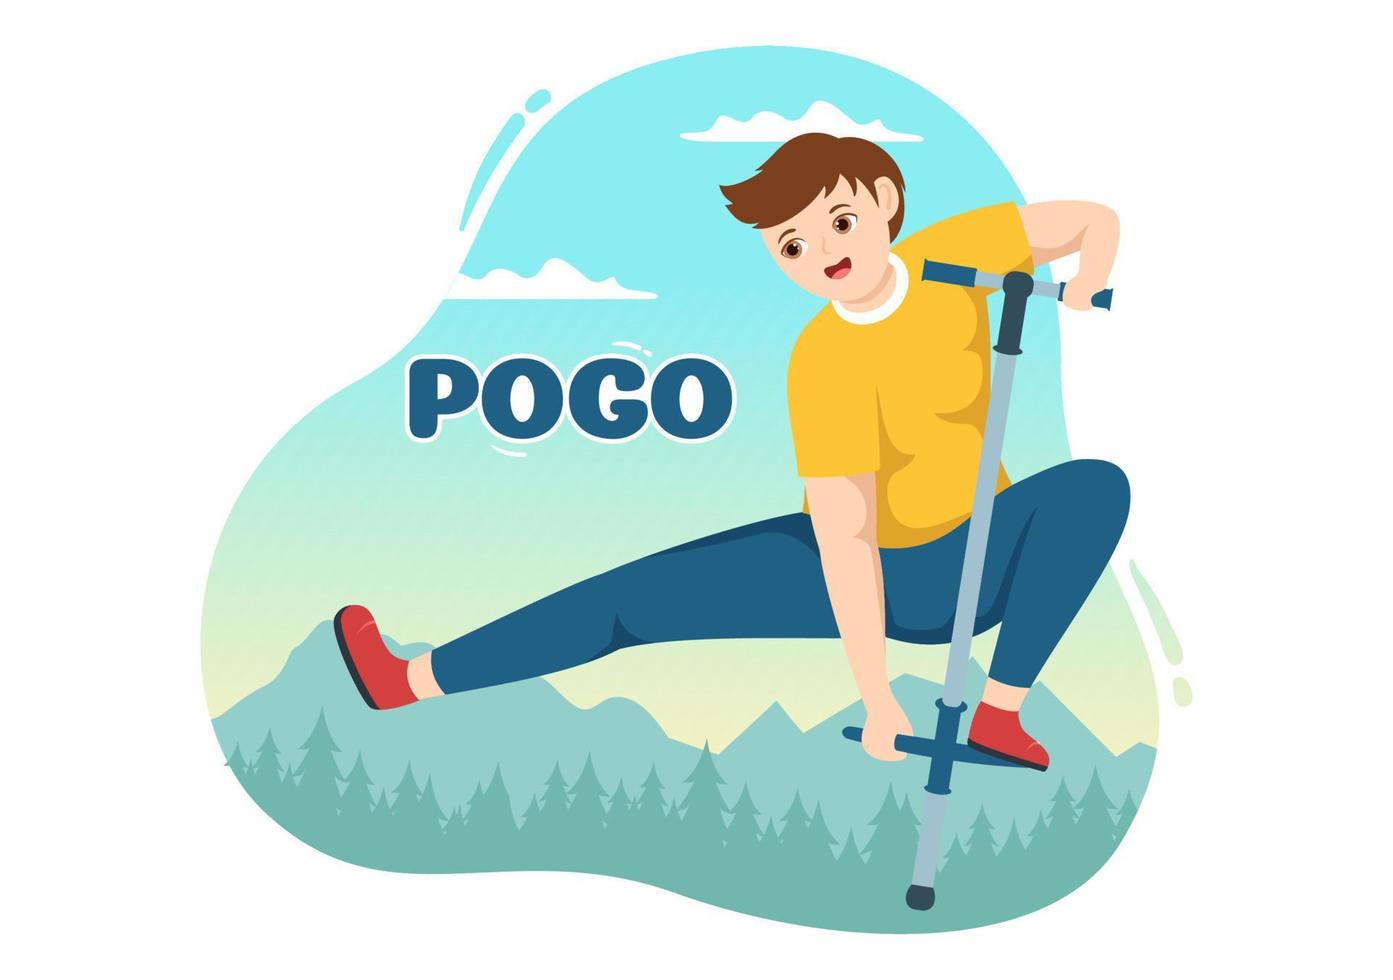 People Playing With Sport Jump Pogo Stick Illustration for Web Banner or Landing Page in Outdoor Fun Toy Flat Cartoon Hand Drawn Templates vector